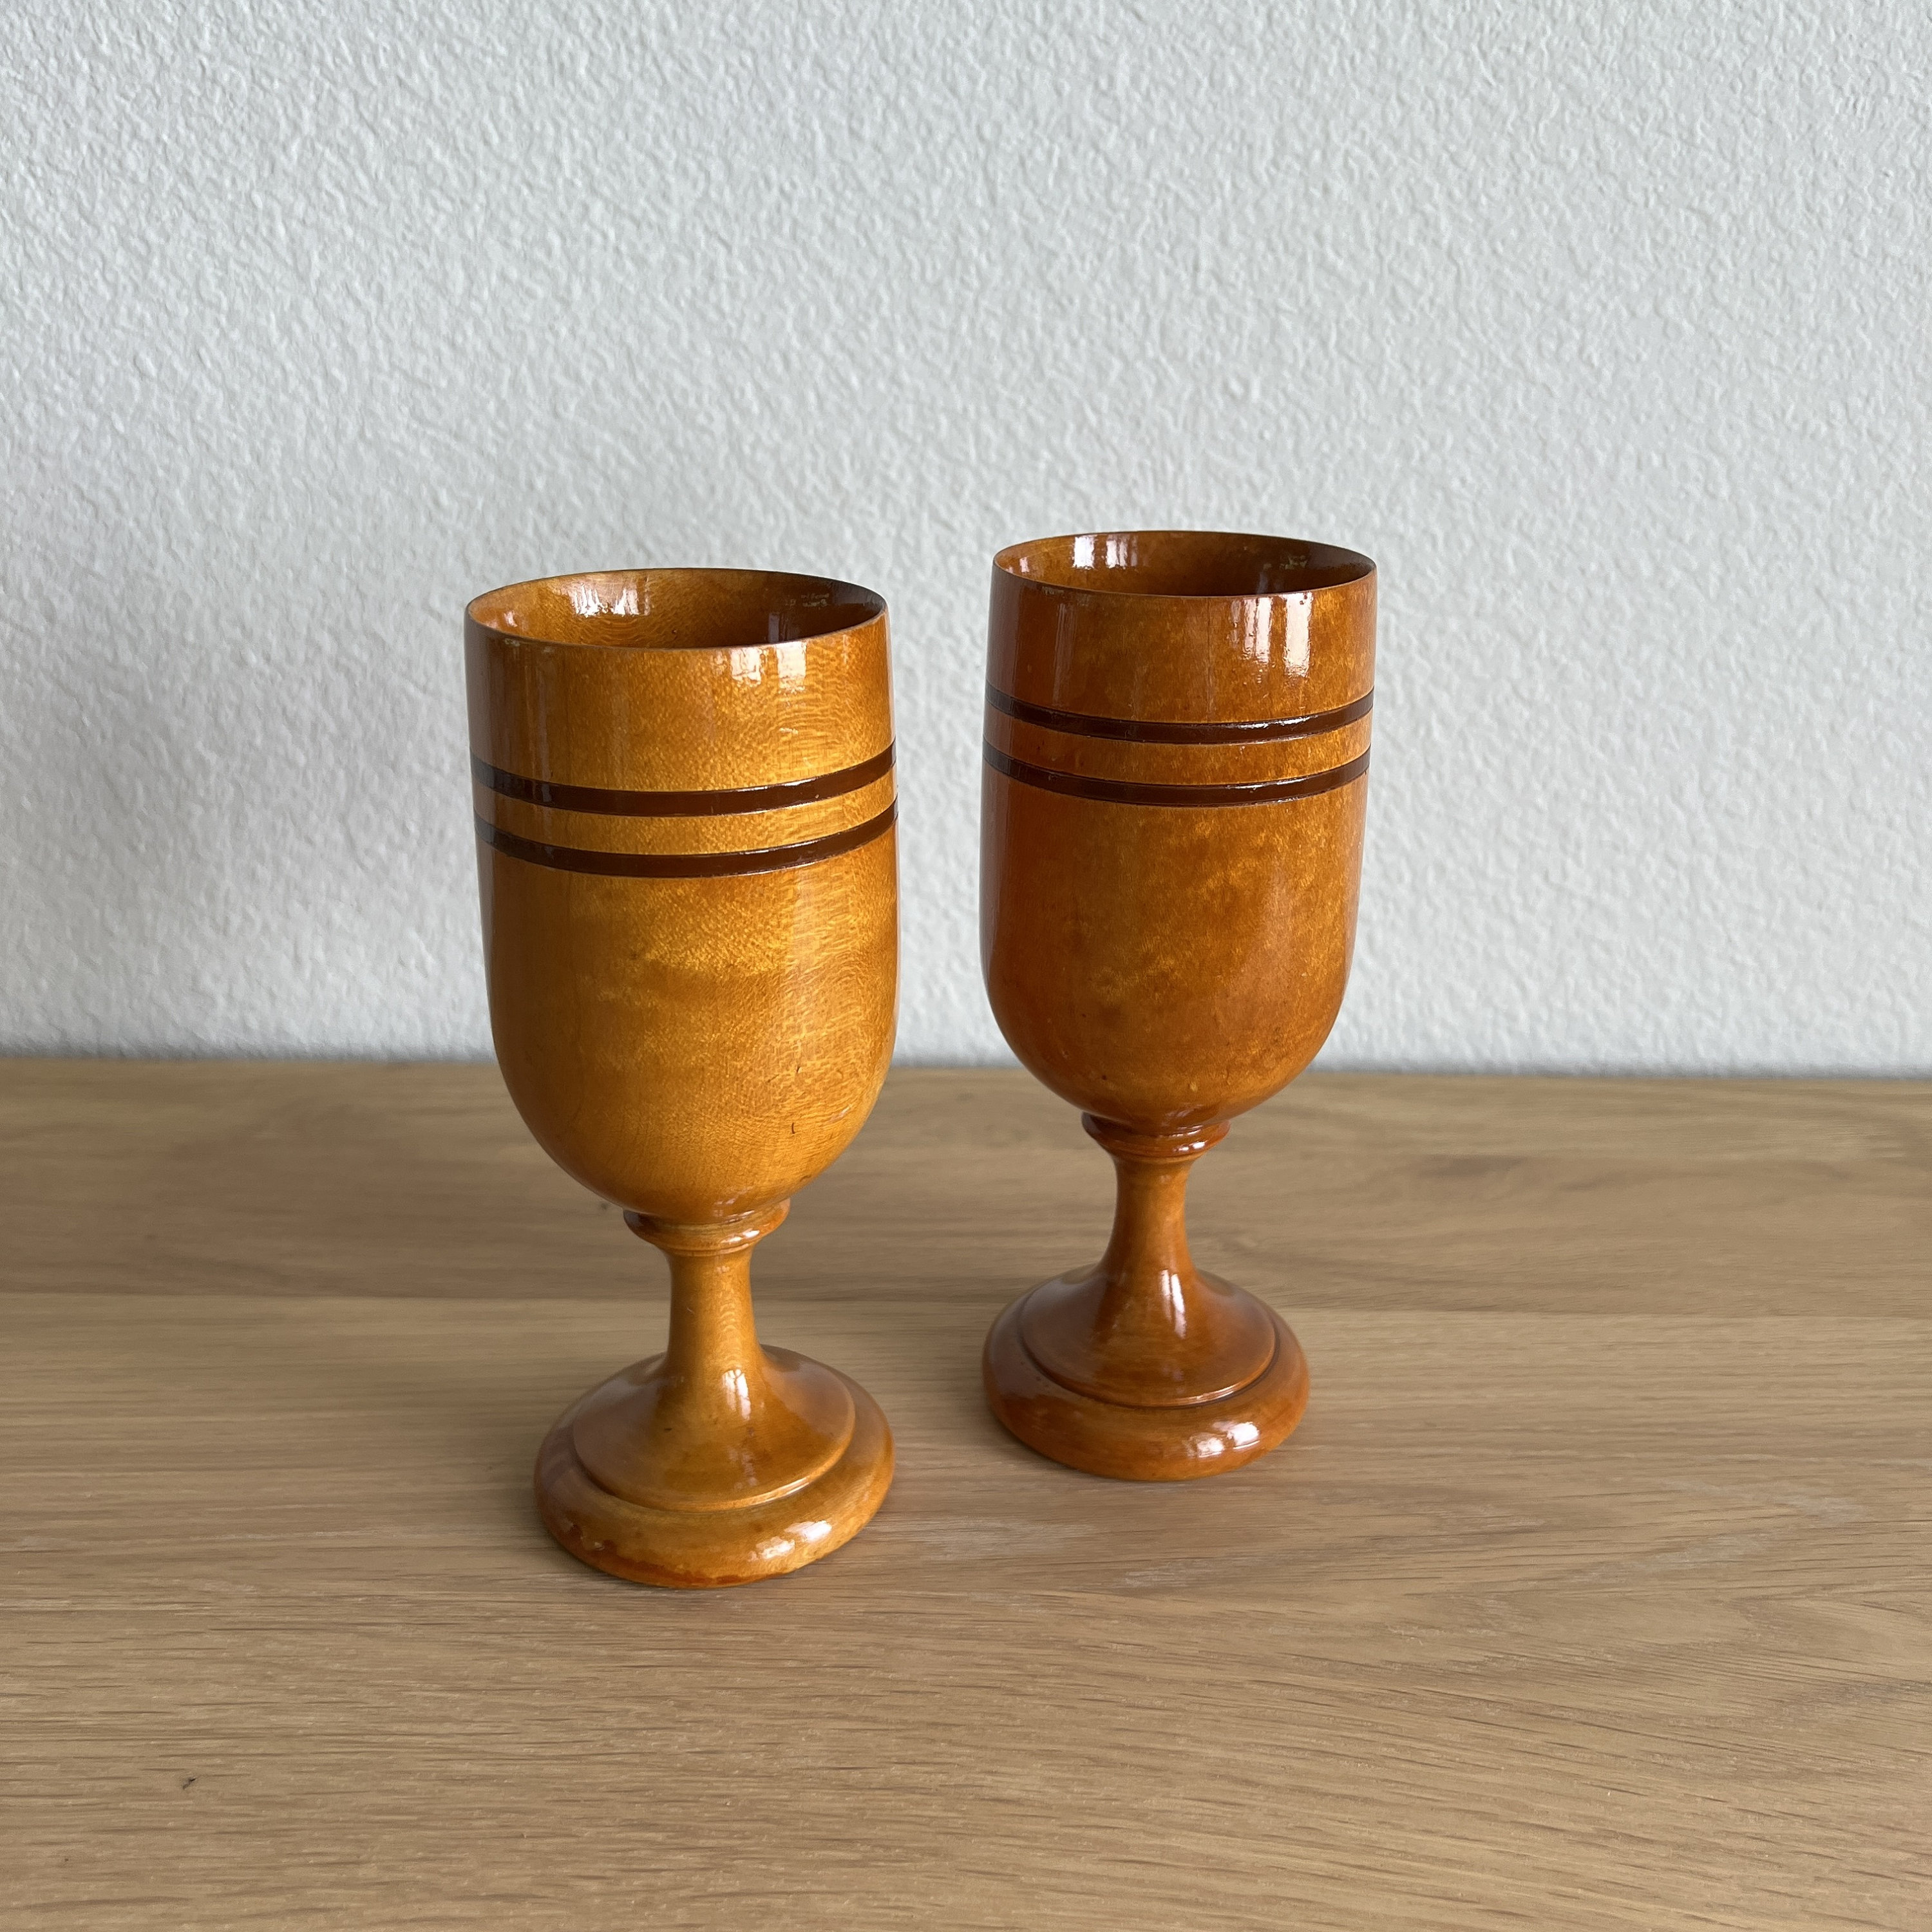 Wooden Wine Glasses Drinking Glass Set of 2 by Indicrafts 